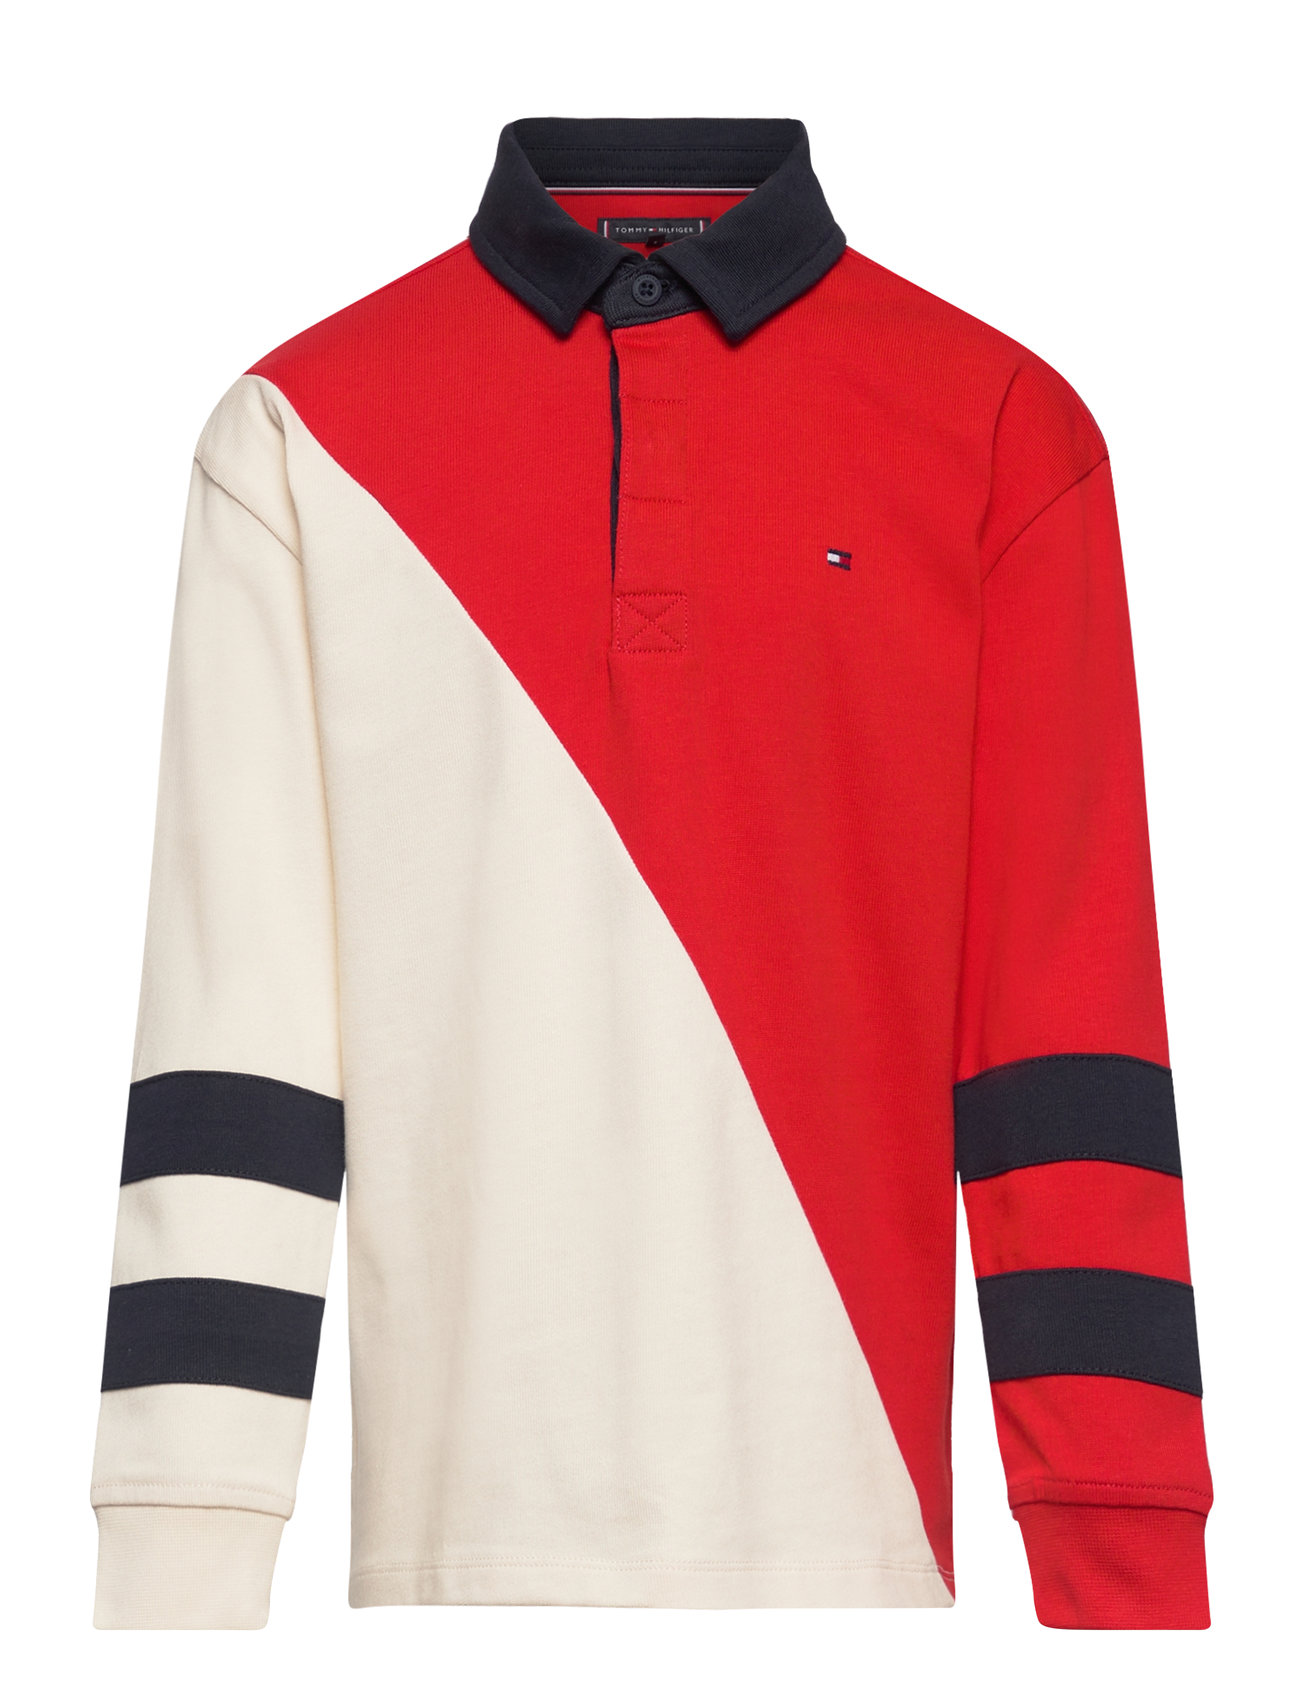 Colorblock Rugby Polo L/S Tops T-shirts Polo Shirts Long-sleeved Polo Shirts Multi/patterned Tommy Hilfiger